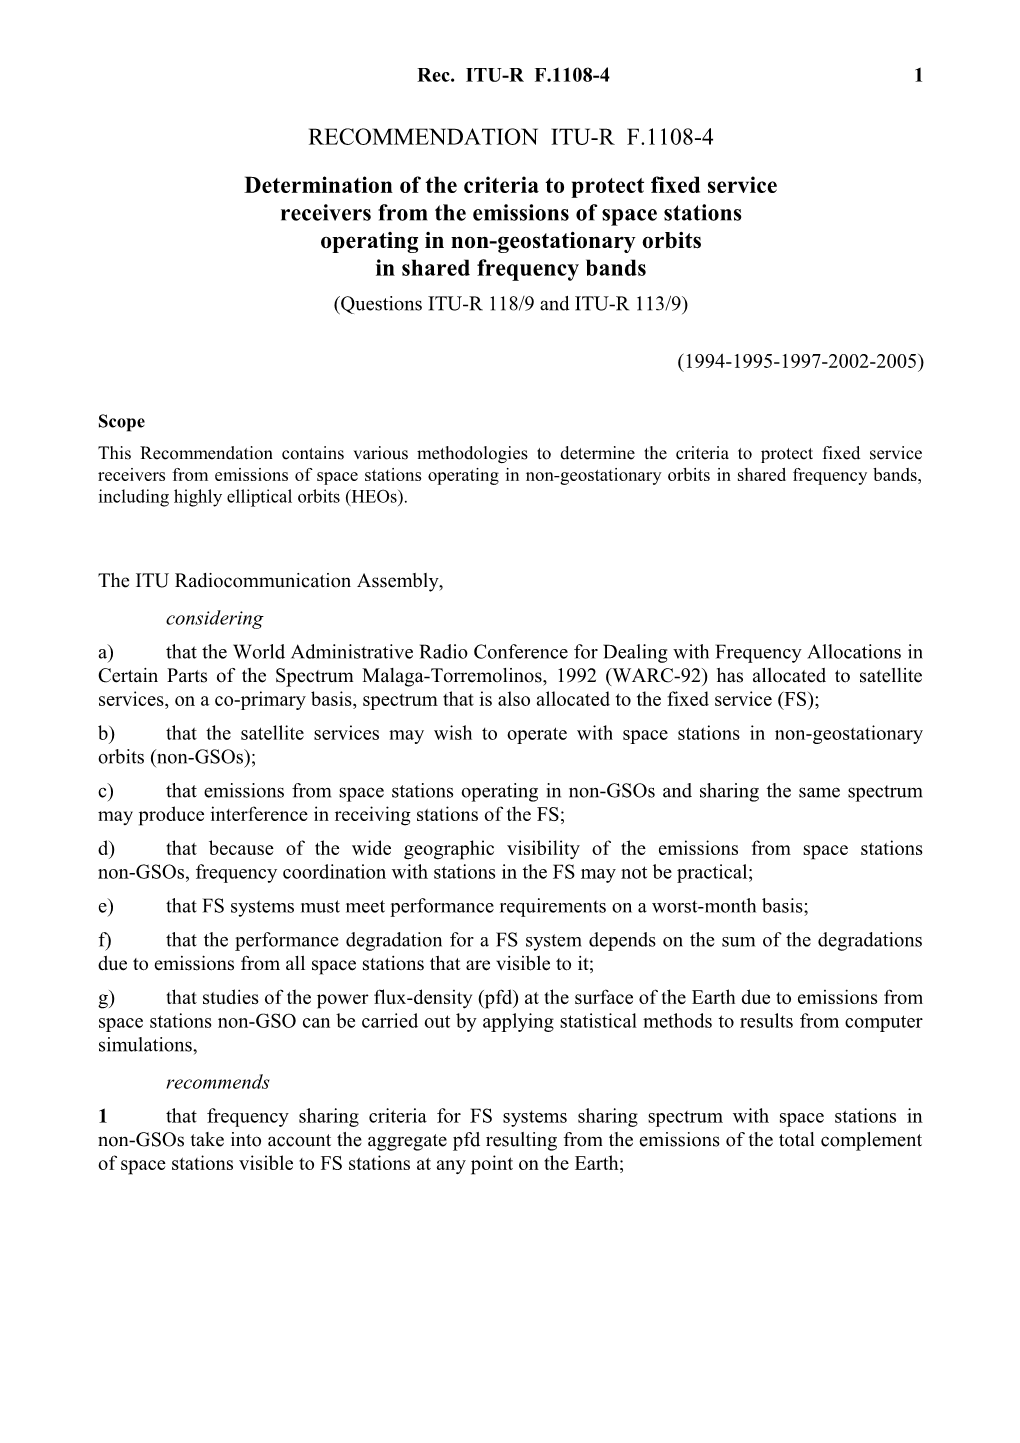 RECOMMENDATION ITU-R F.1108-4 - Determination of the Criteria to Protect Fixed Service